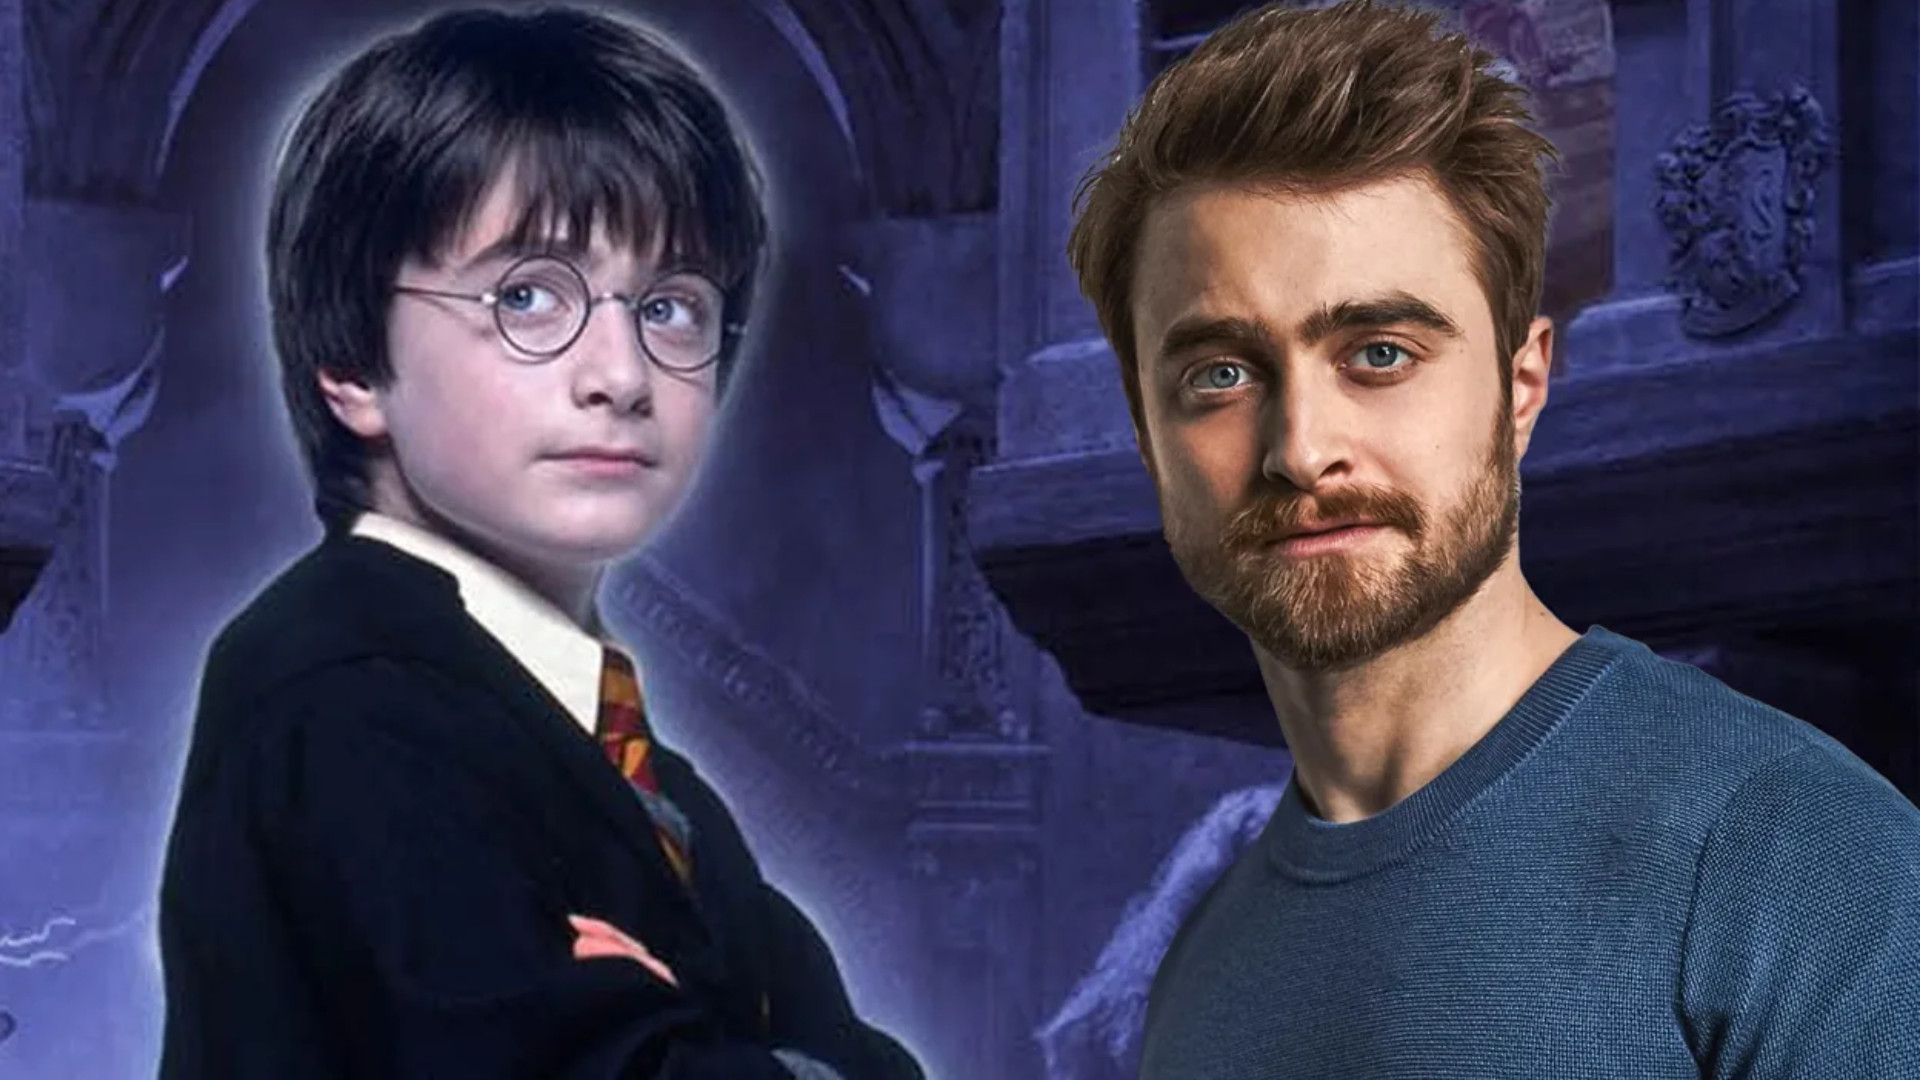 A young Harry Potter stands next to Daniel Radcliffe